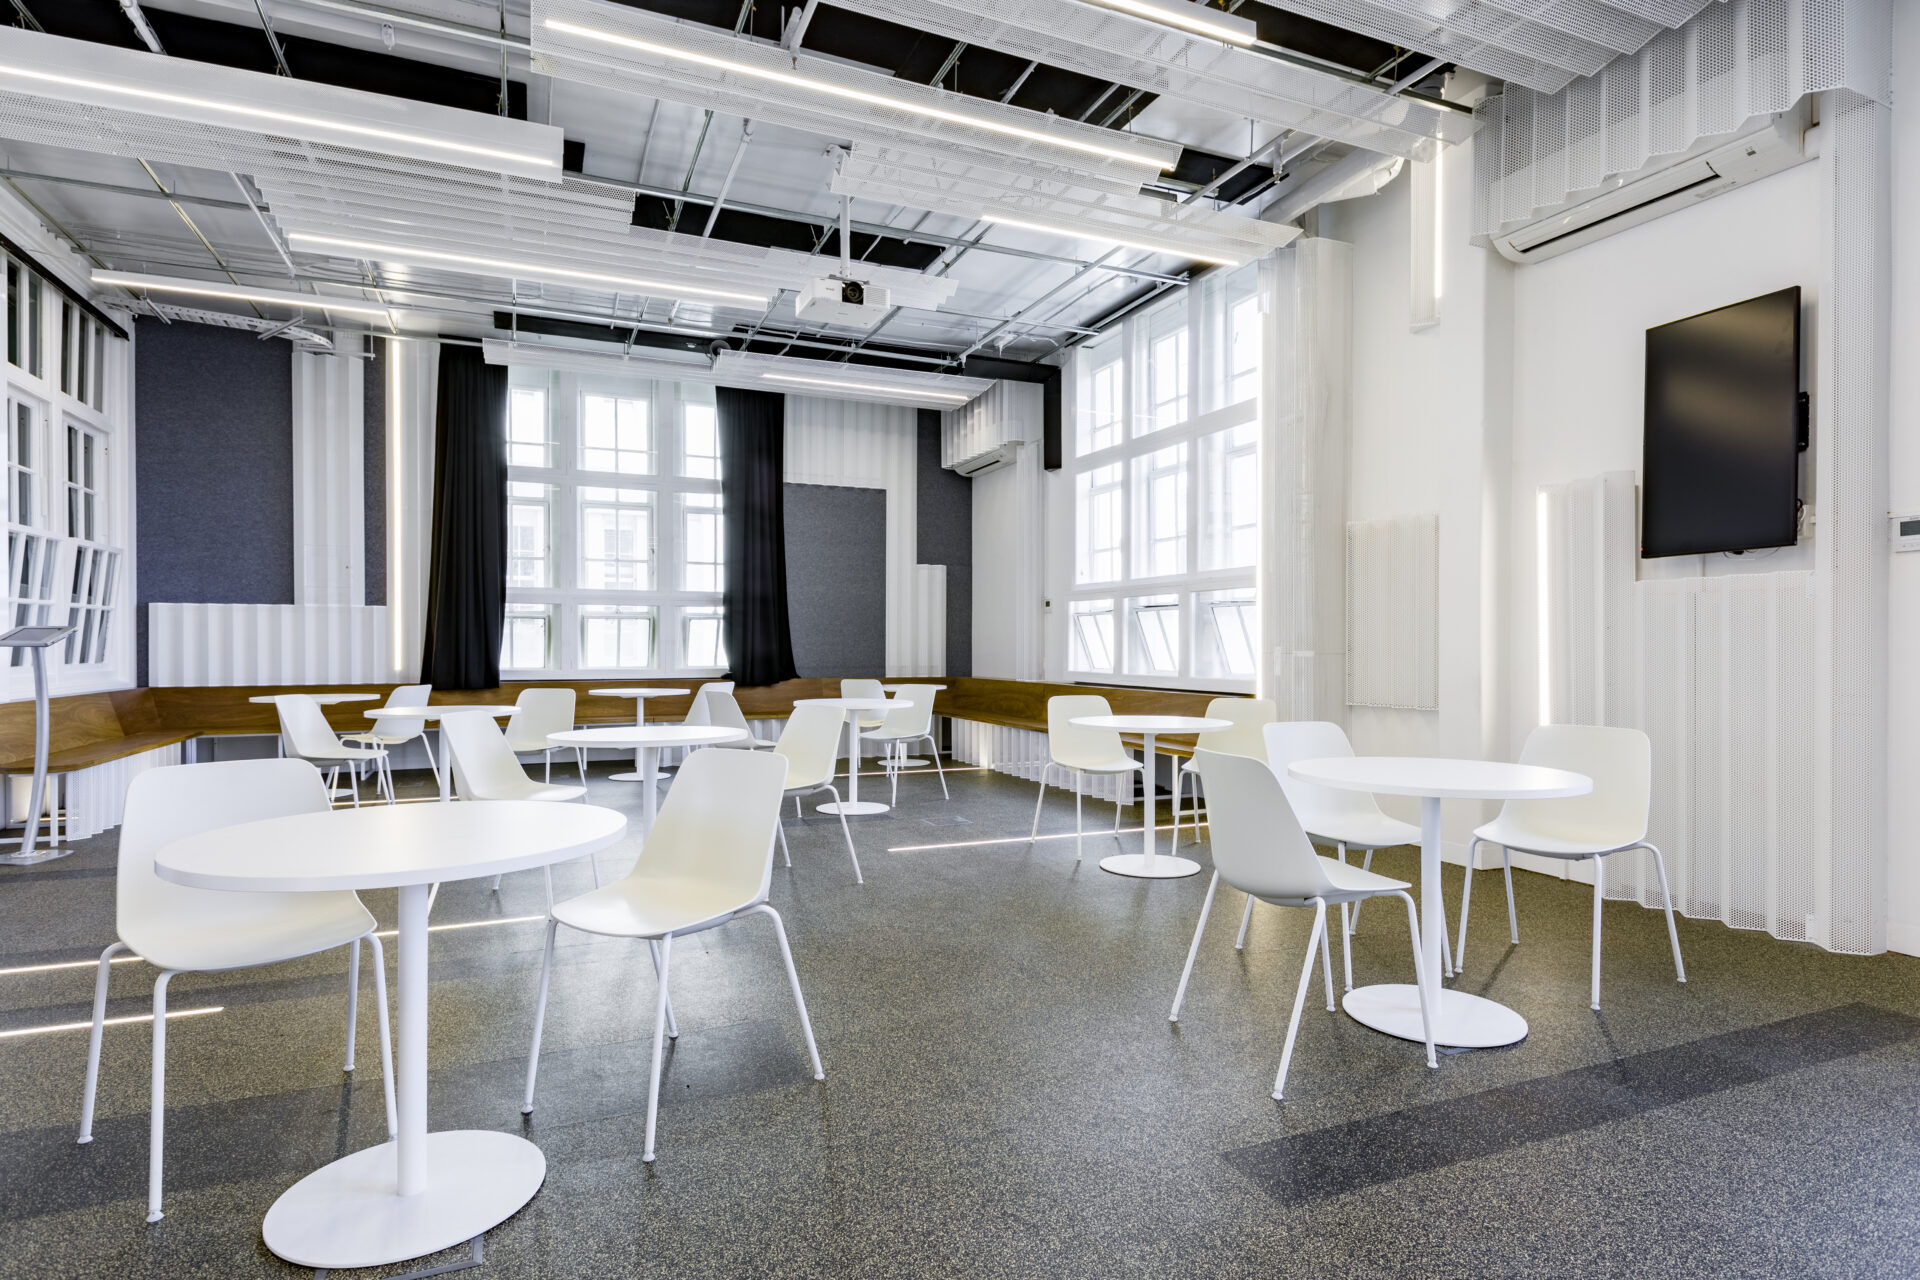 Event space at music market filled with white tables and chairs. The flooring is grey, and the walls are white and grey. The room is lit with bright natural light from large panelled windows.